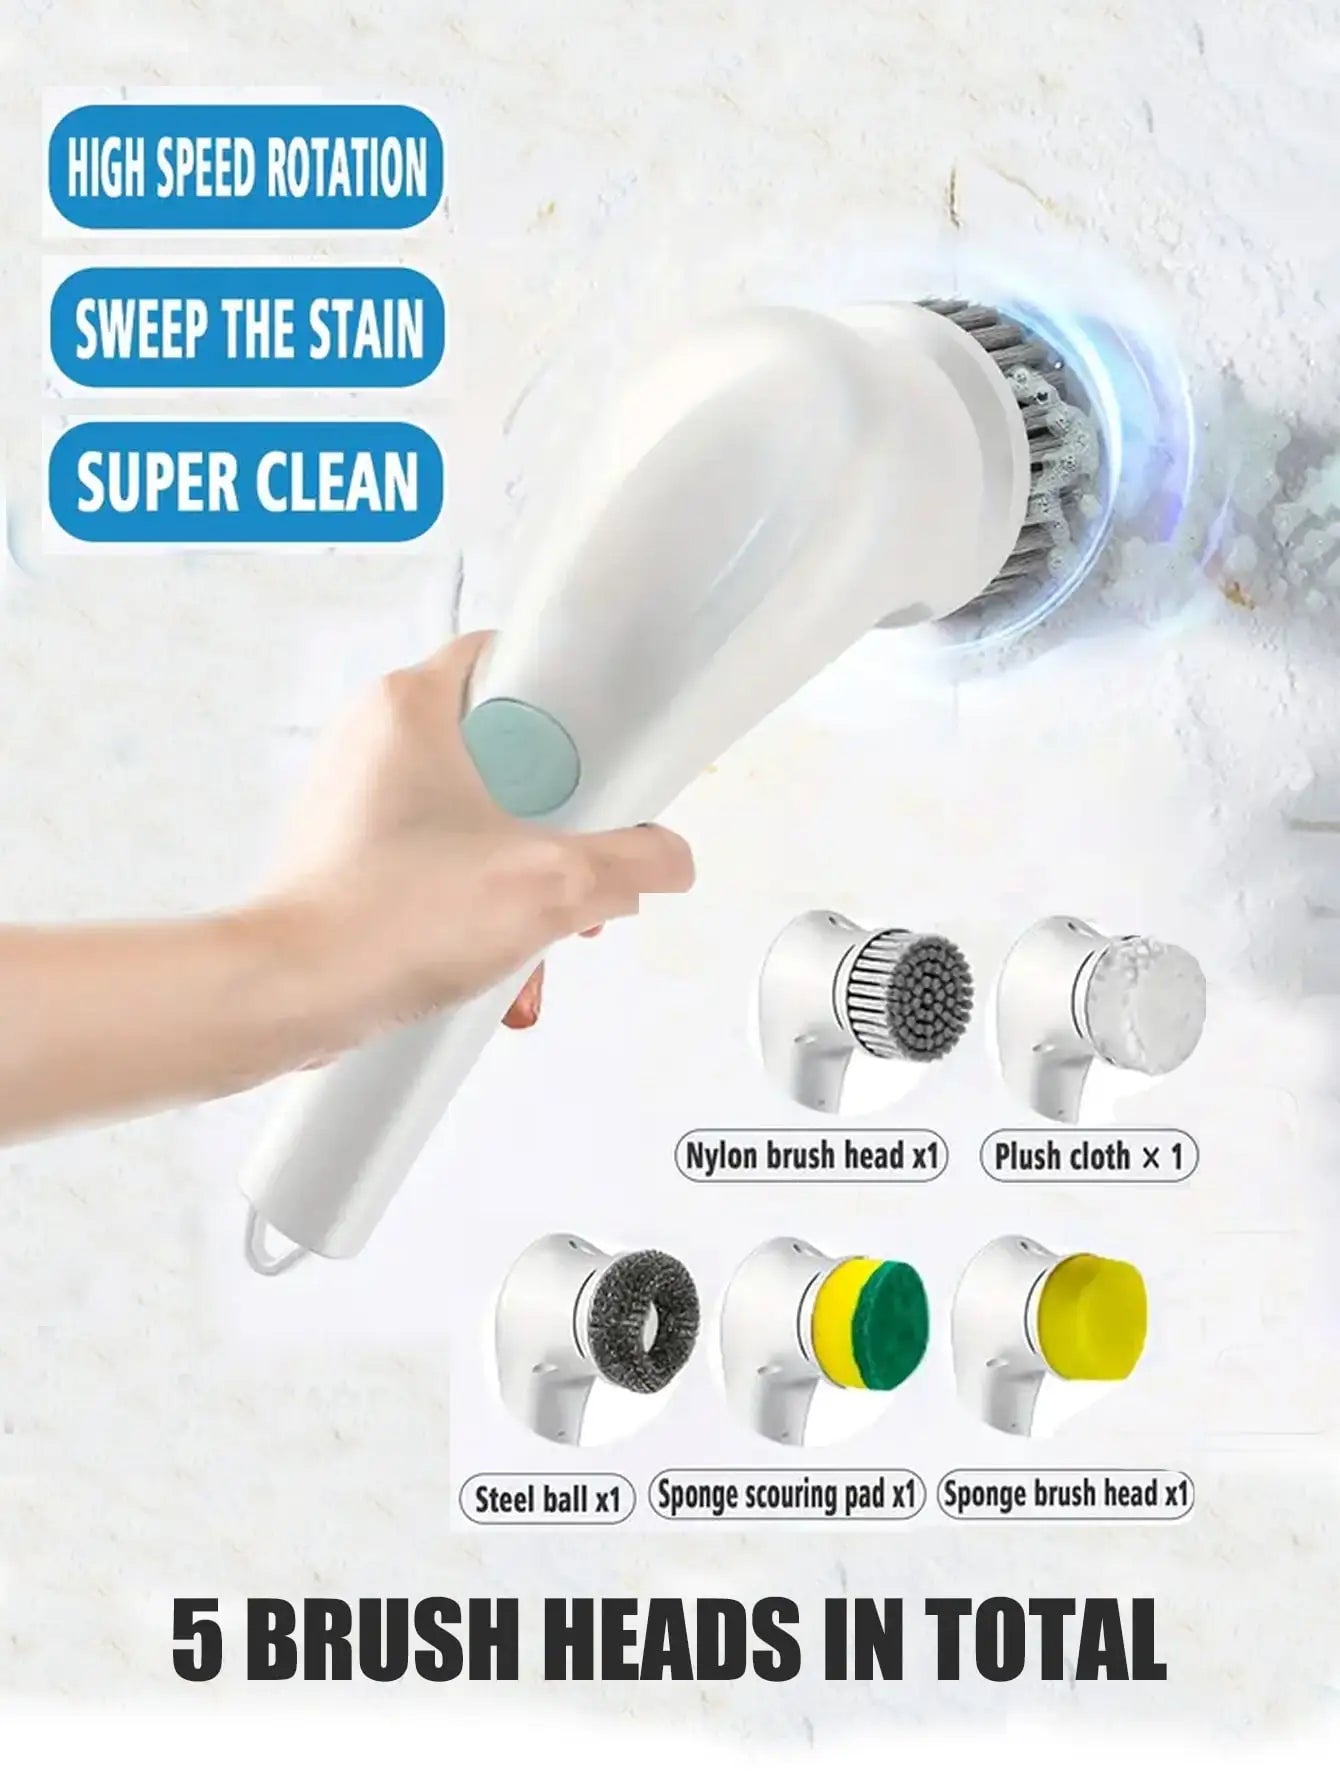 Magic Brush Pro: Electric Rotary Scrubber for Easy Cleaning